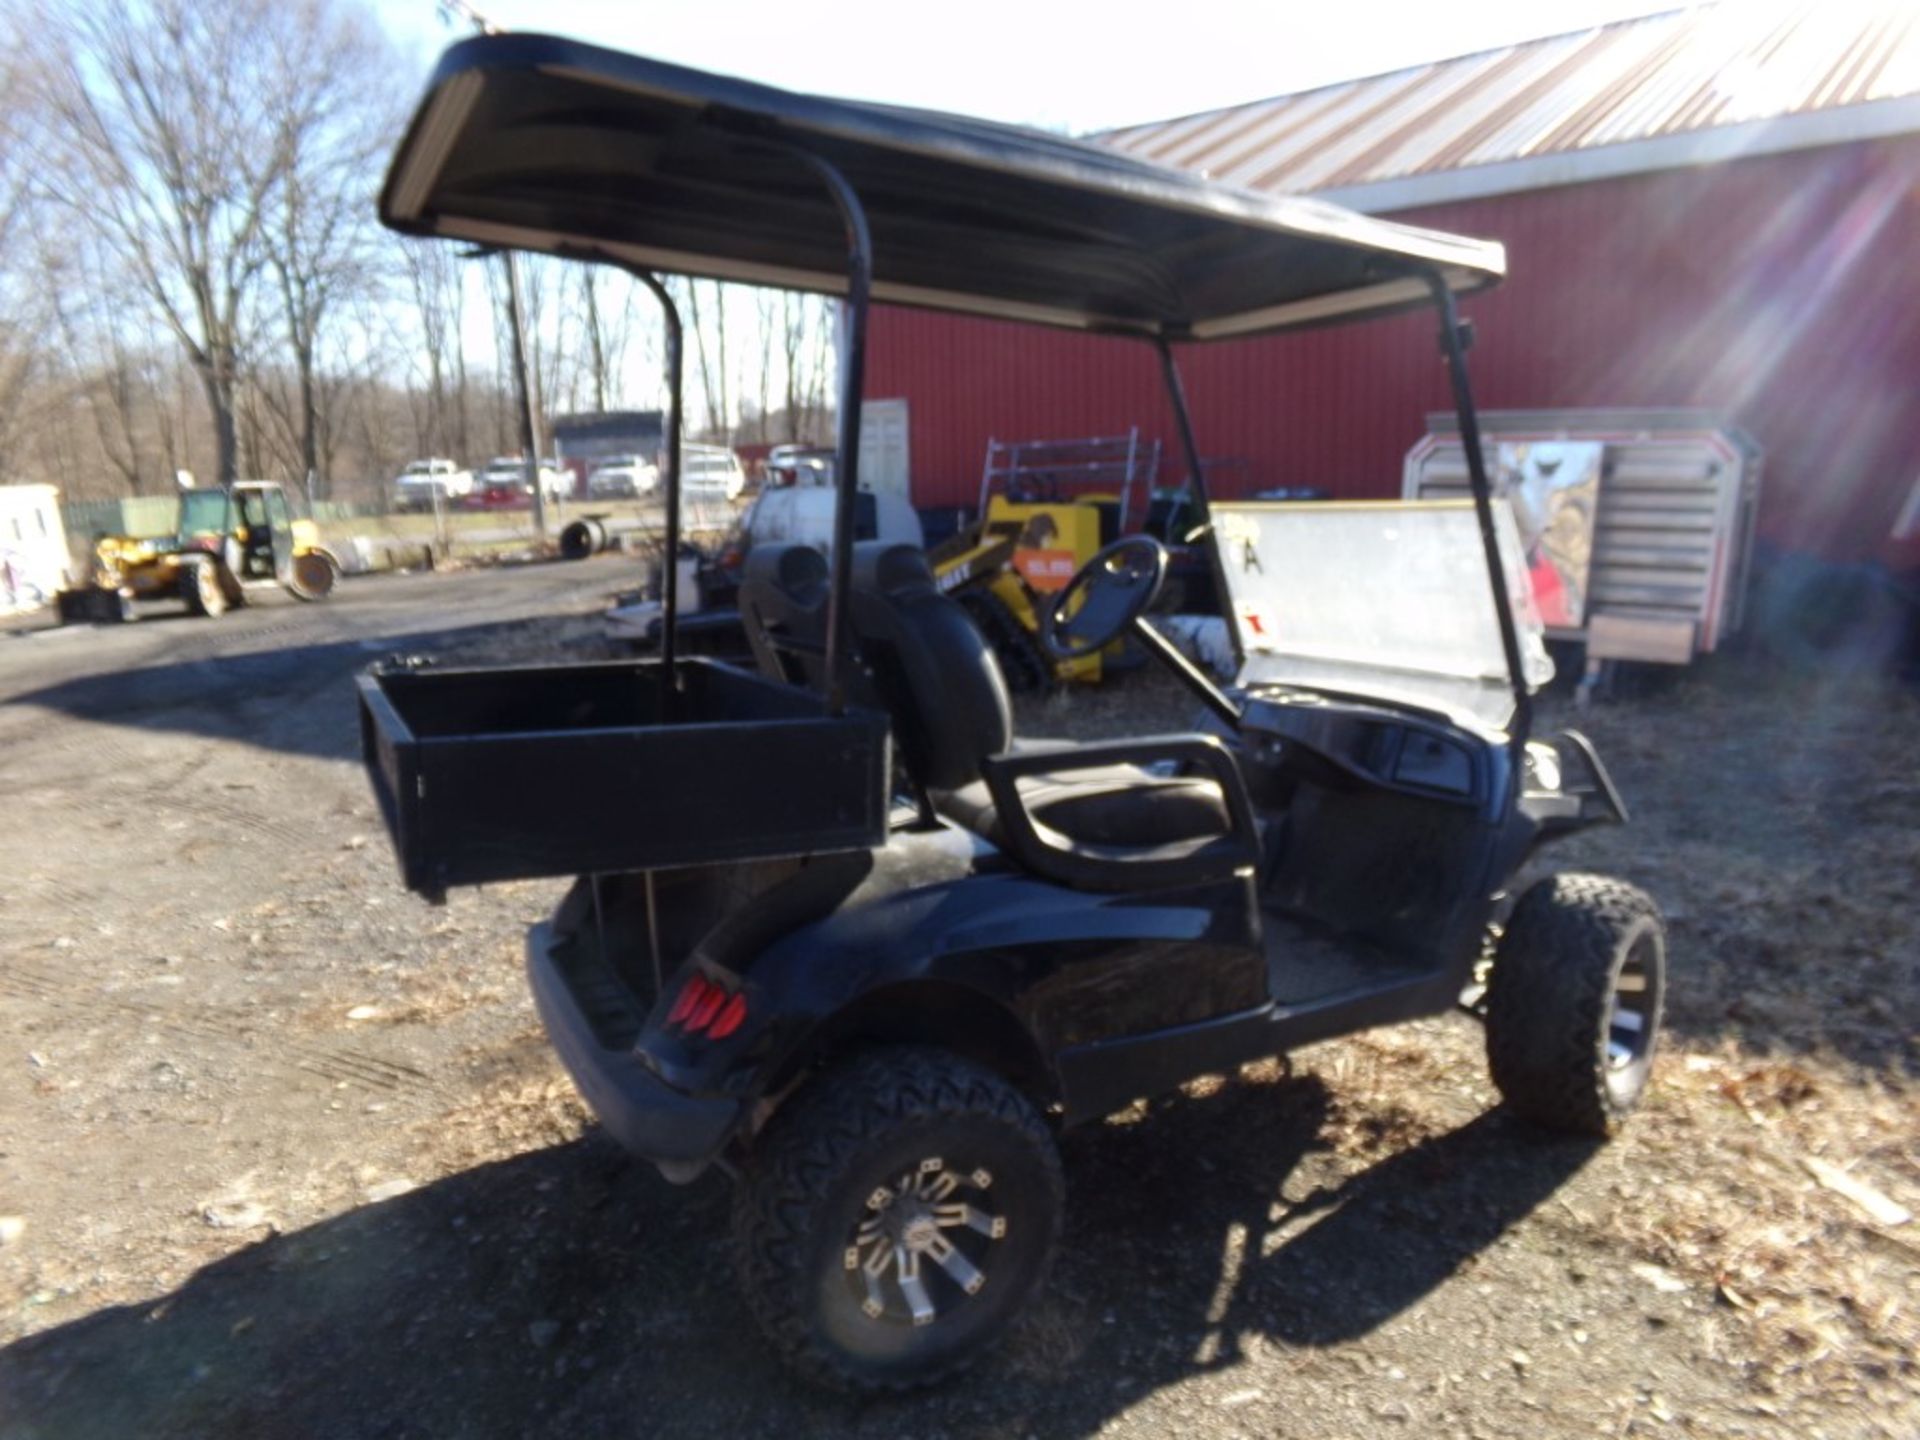 Black Lifted Yamaha Gas Golf Cart with Canopy, Windshield, Steel Utility Box, Cart # L137